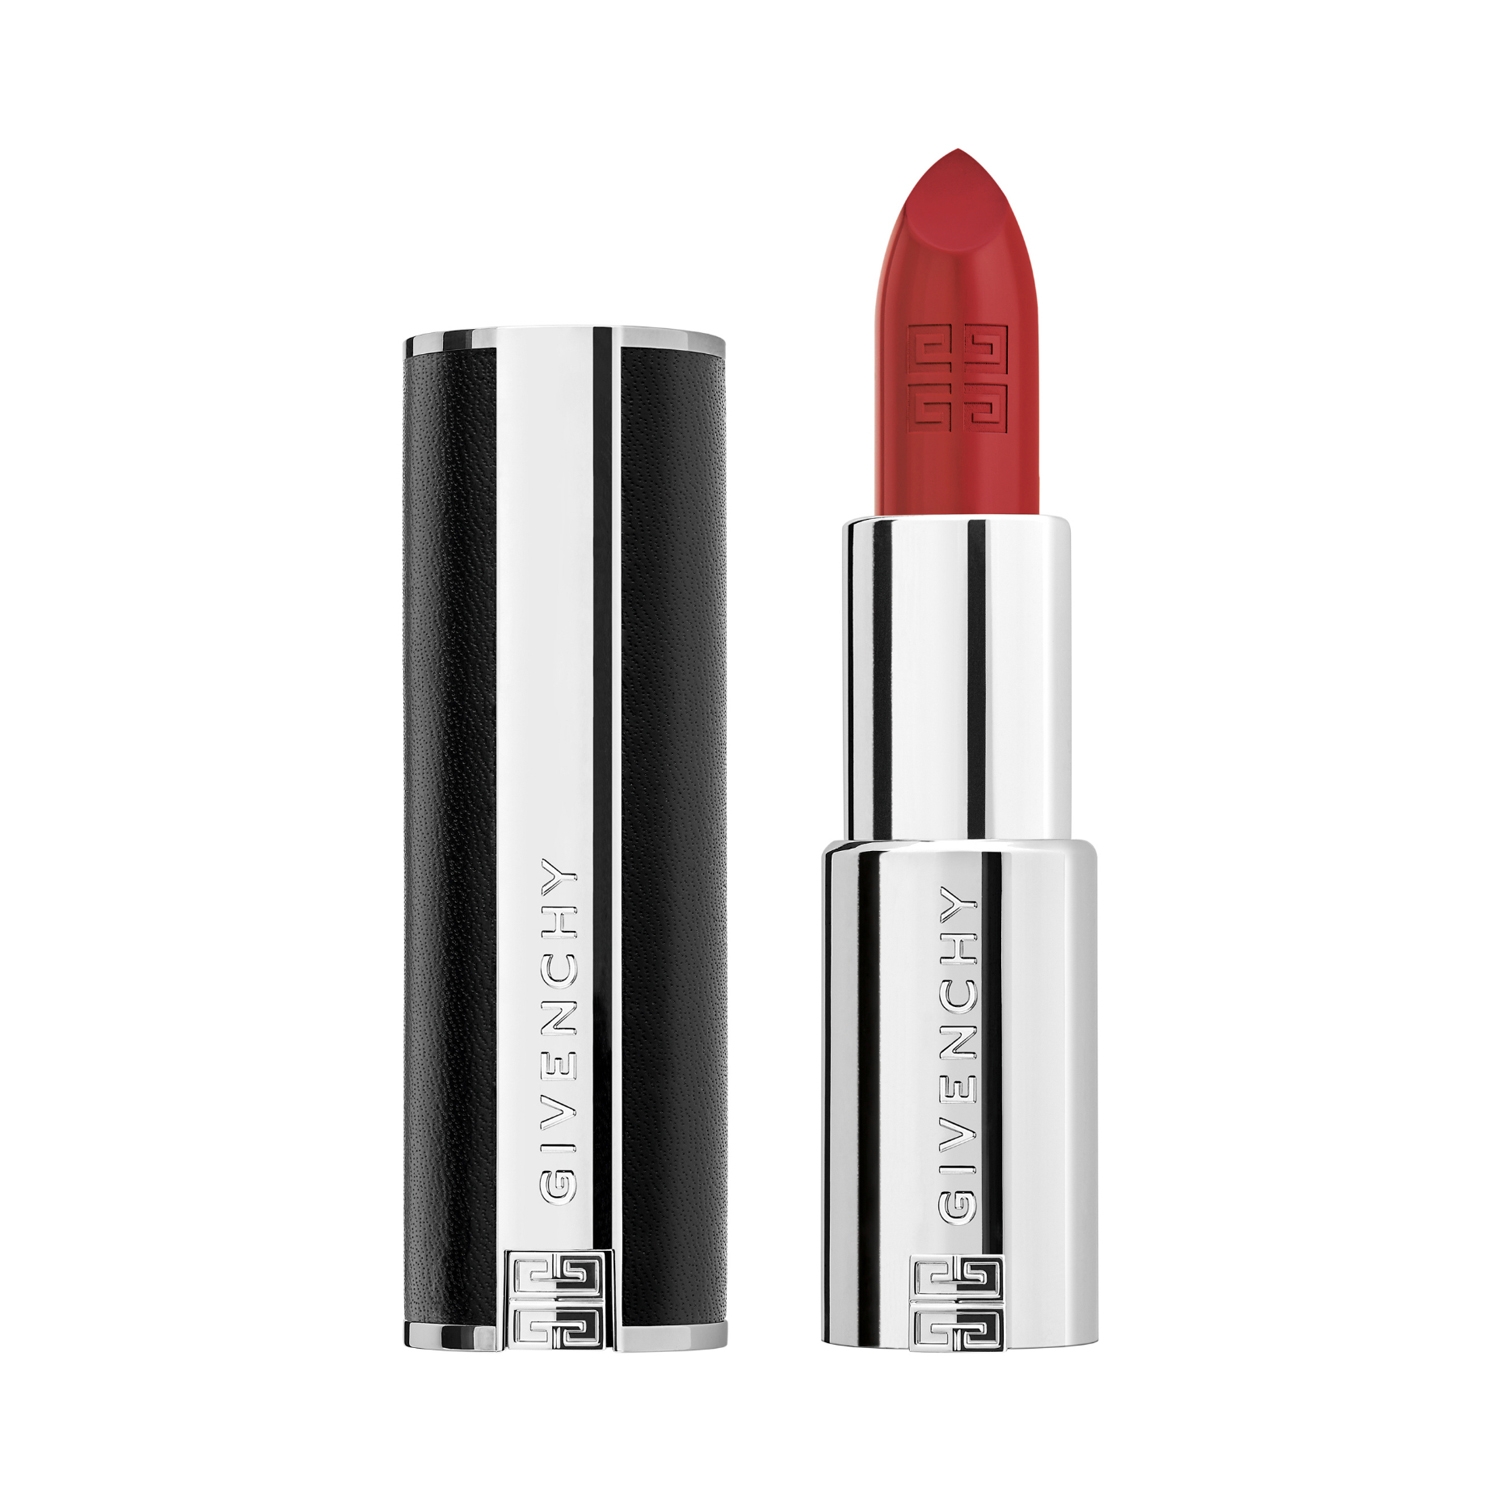 Givenchy | Givenchy Le Rouge Interdit Intense Silk Lipstick - N 330 Rouge Ambre​ (3.4g)